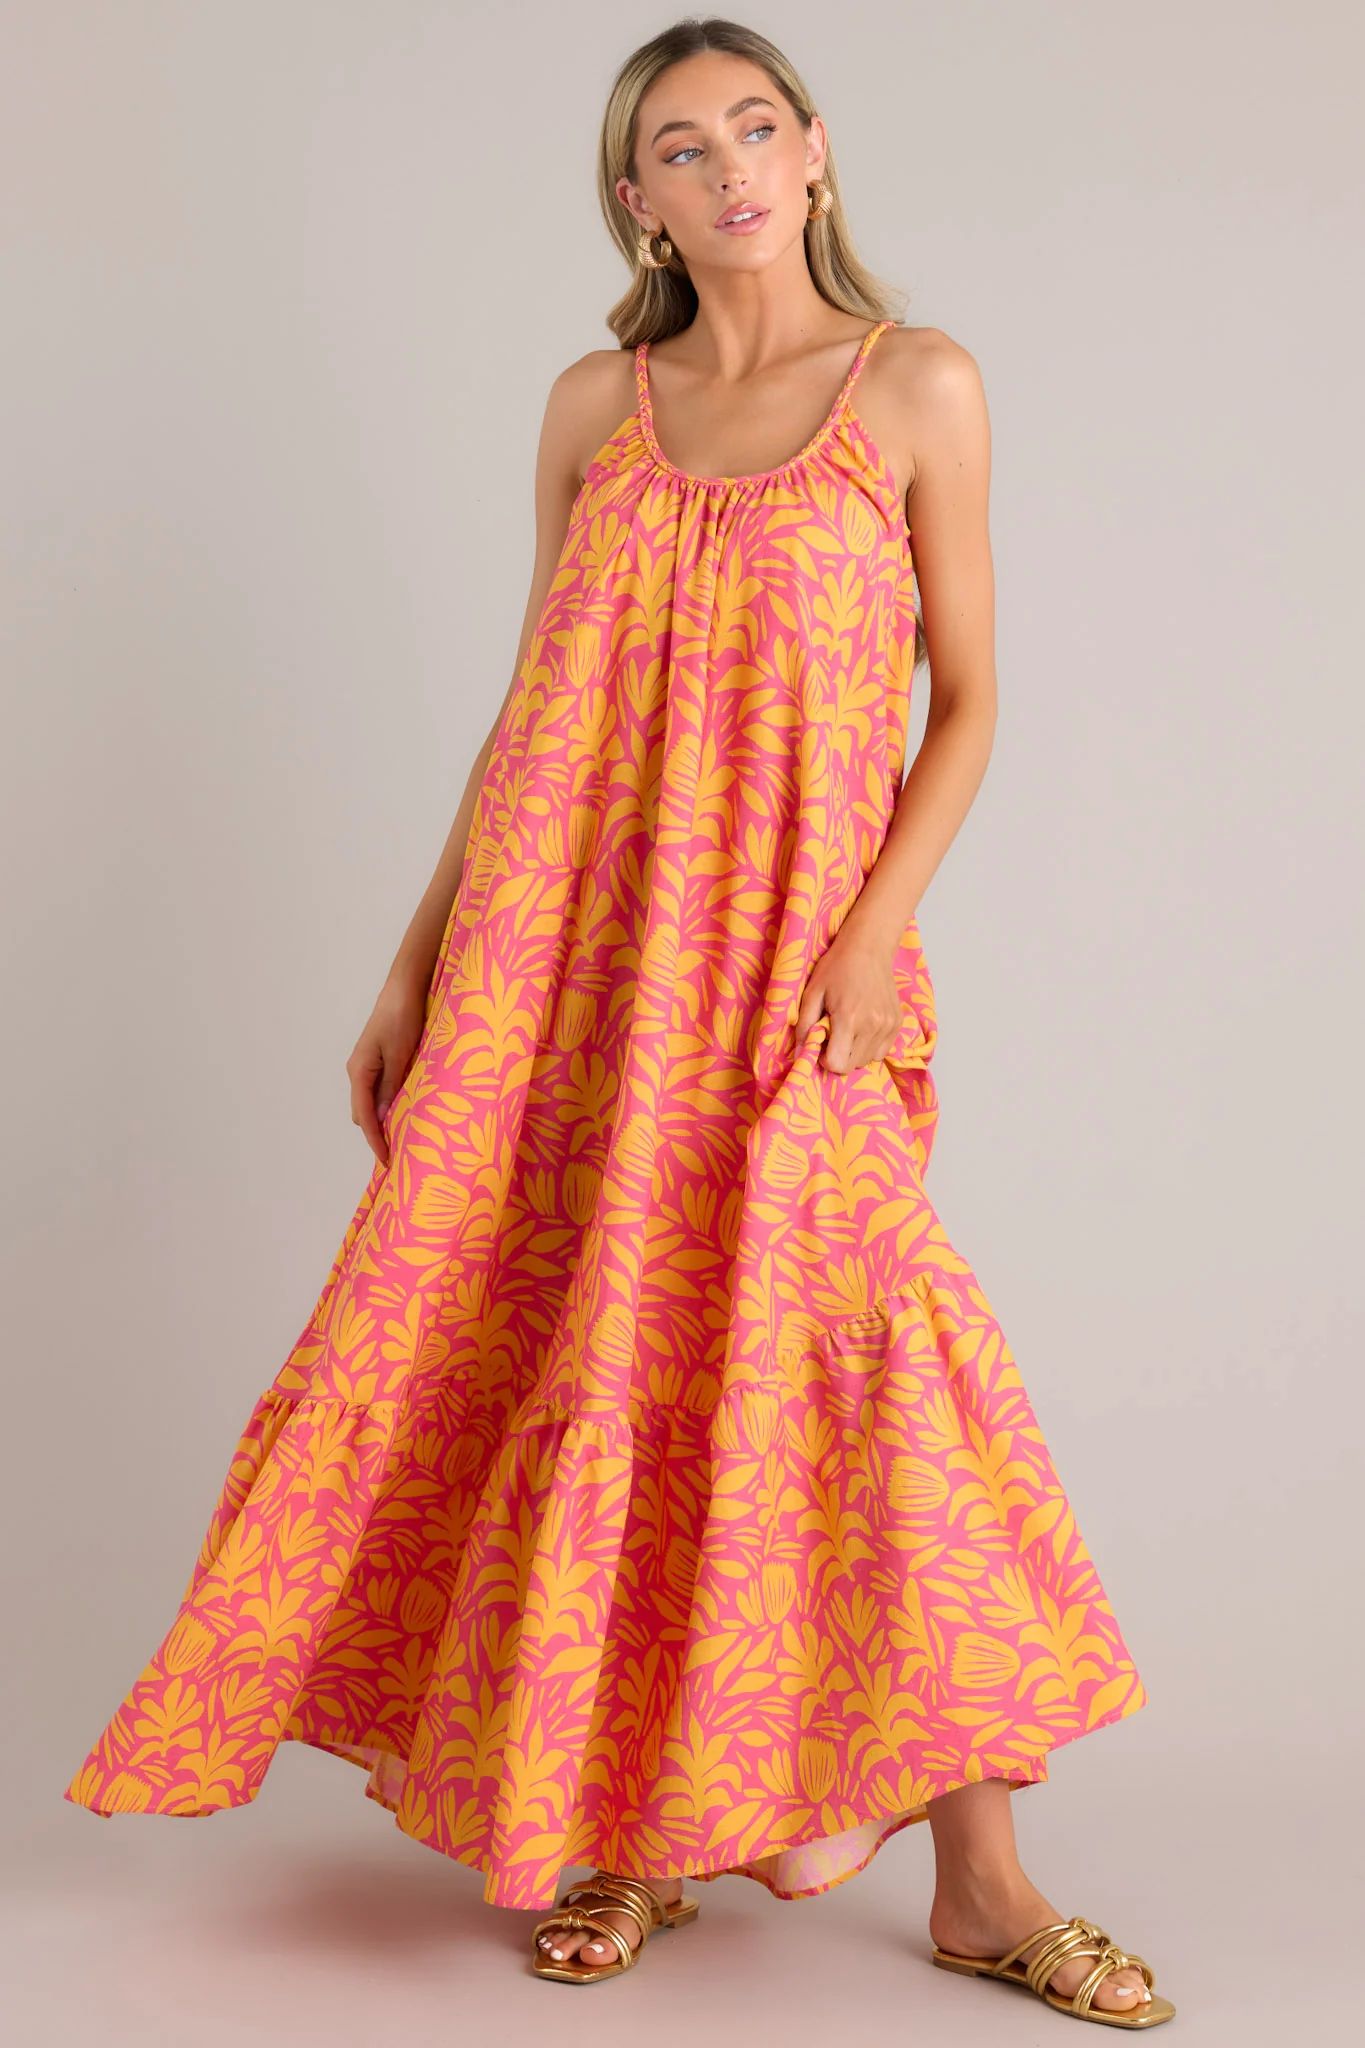 The Game Is On Pink Multi Print Maxi Dress | Red Dress